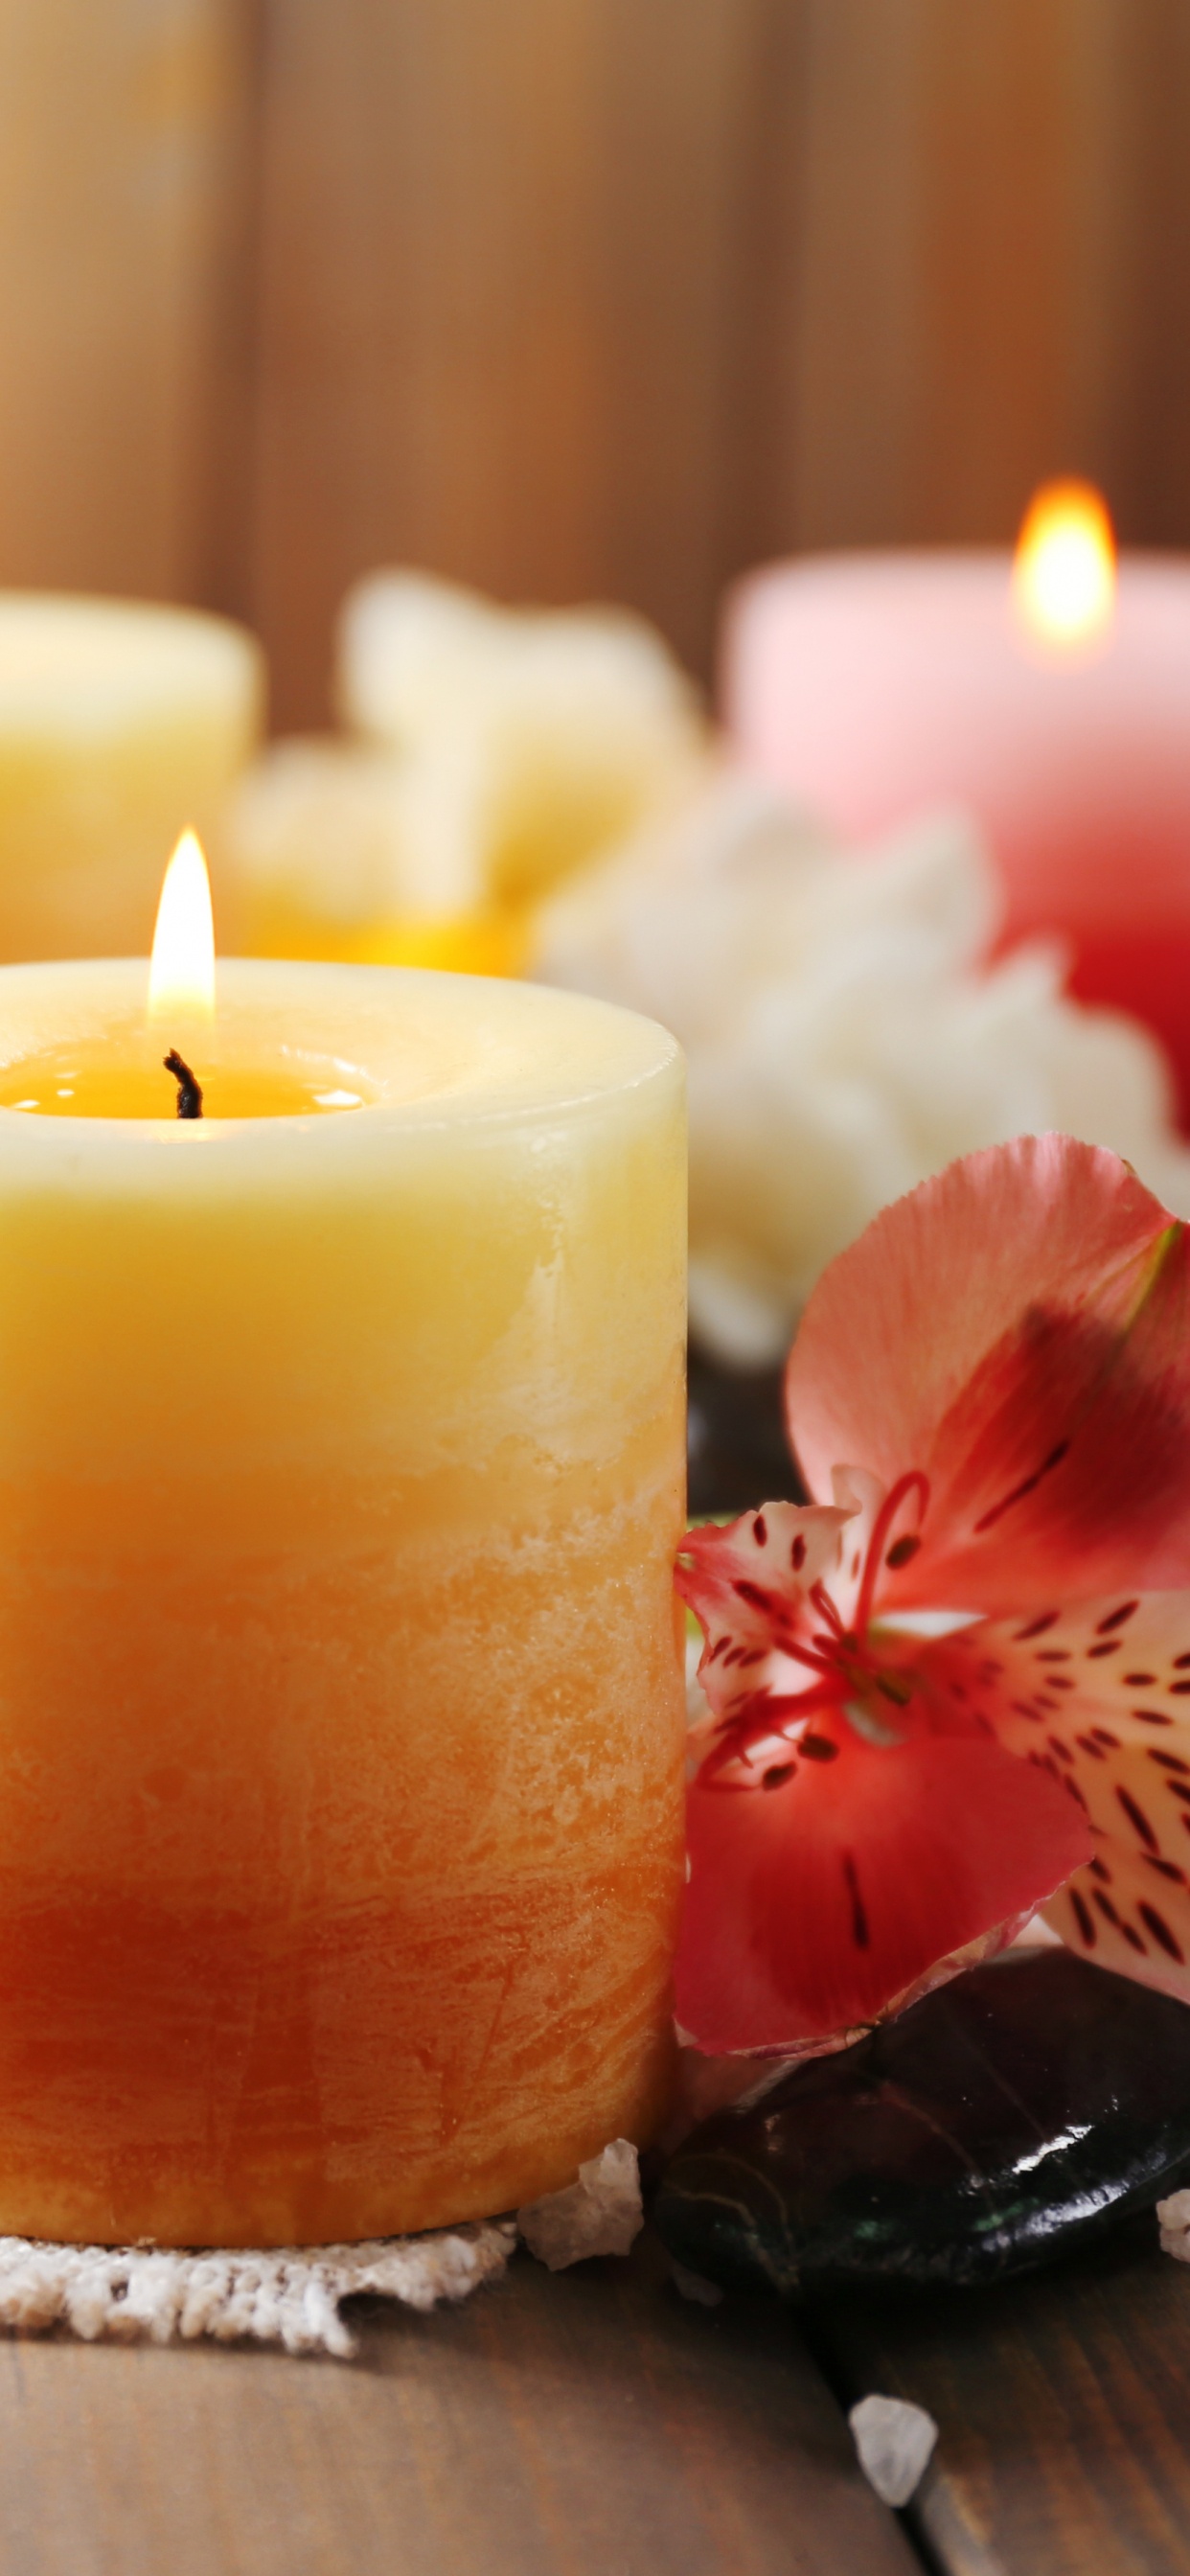 Candle, Wax, Lighting, Yellow, Flameless Candle. Wallpaper in 1242x2688 Resolution